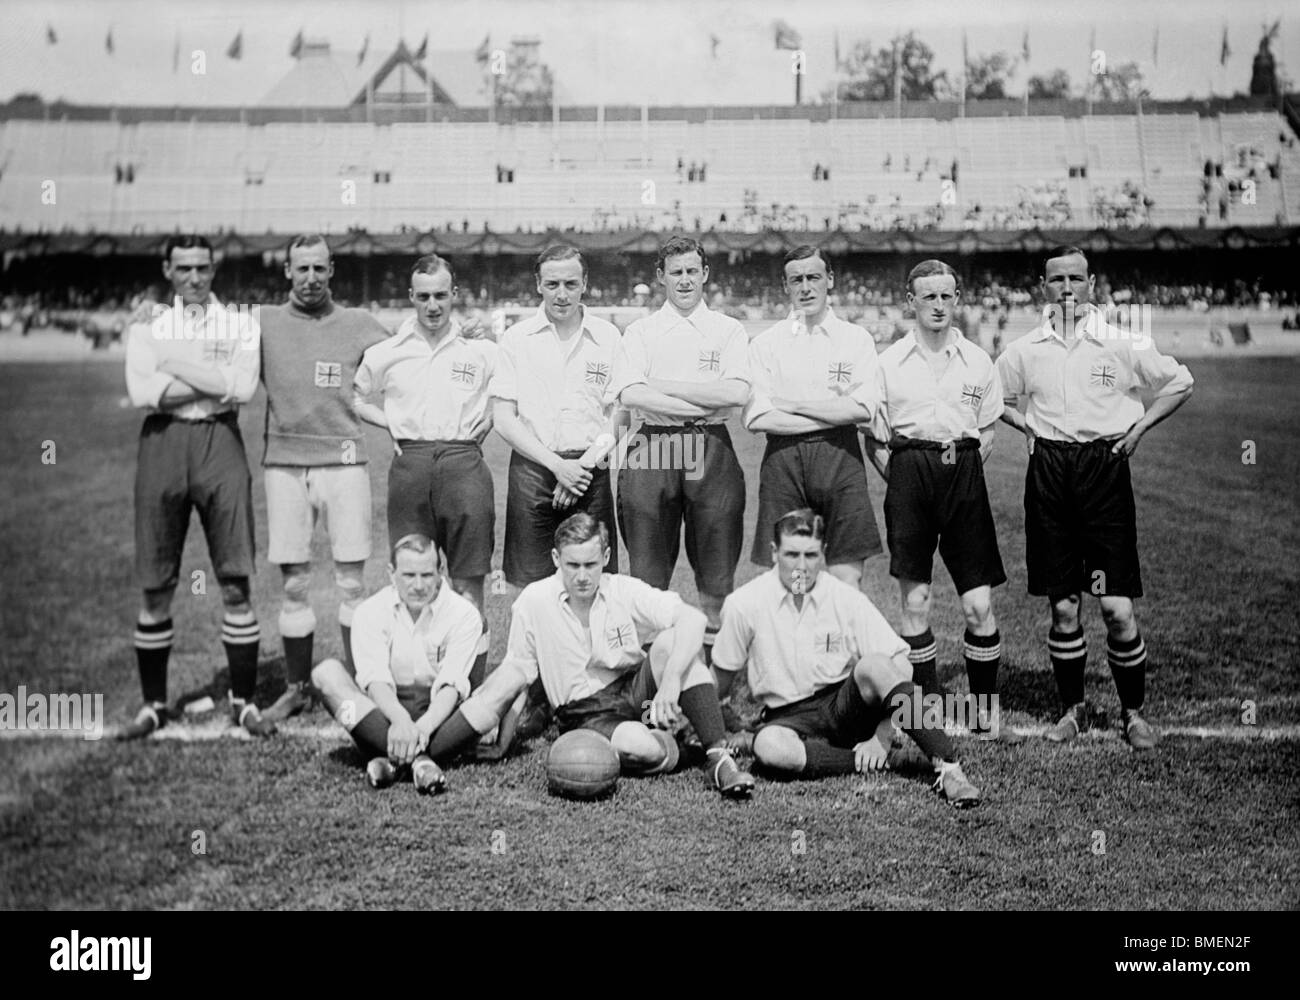 Vintage photo of the England / Great Britain football team which won the Gold Medal at the 1912 Olympics in Stockholm, Sweden. Stock Photo